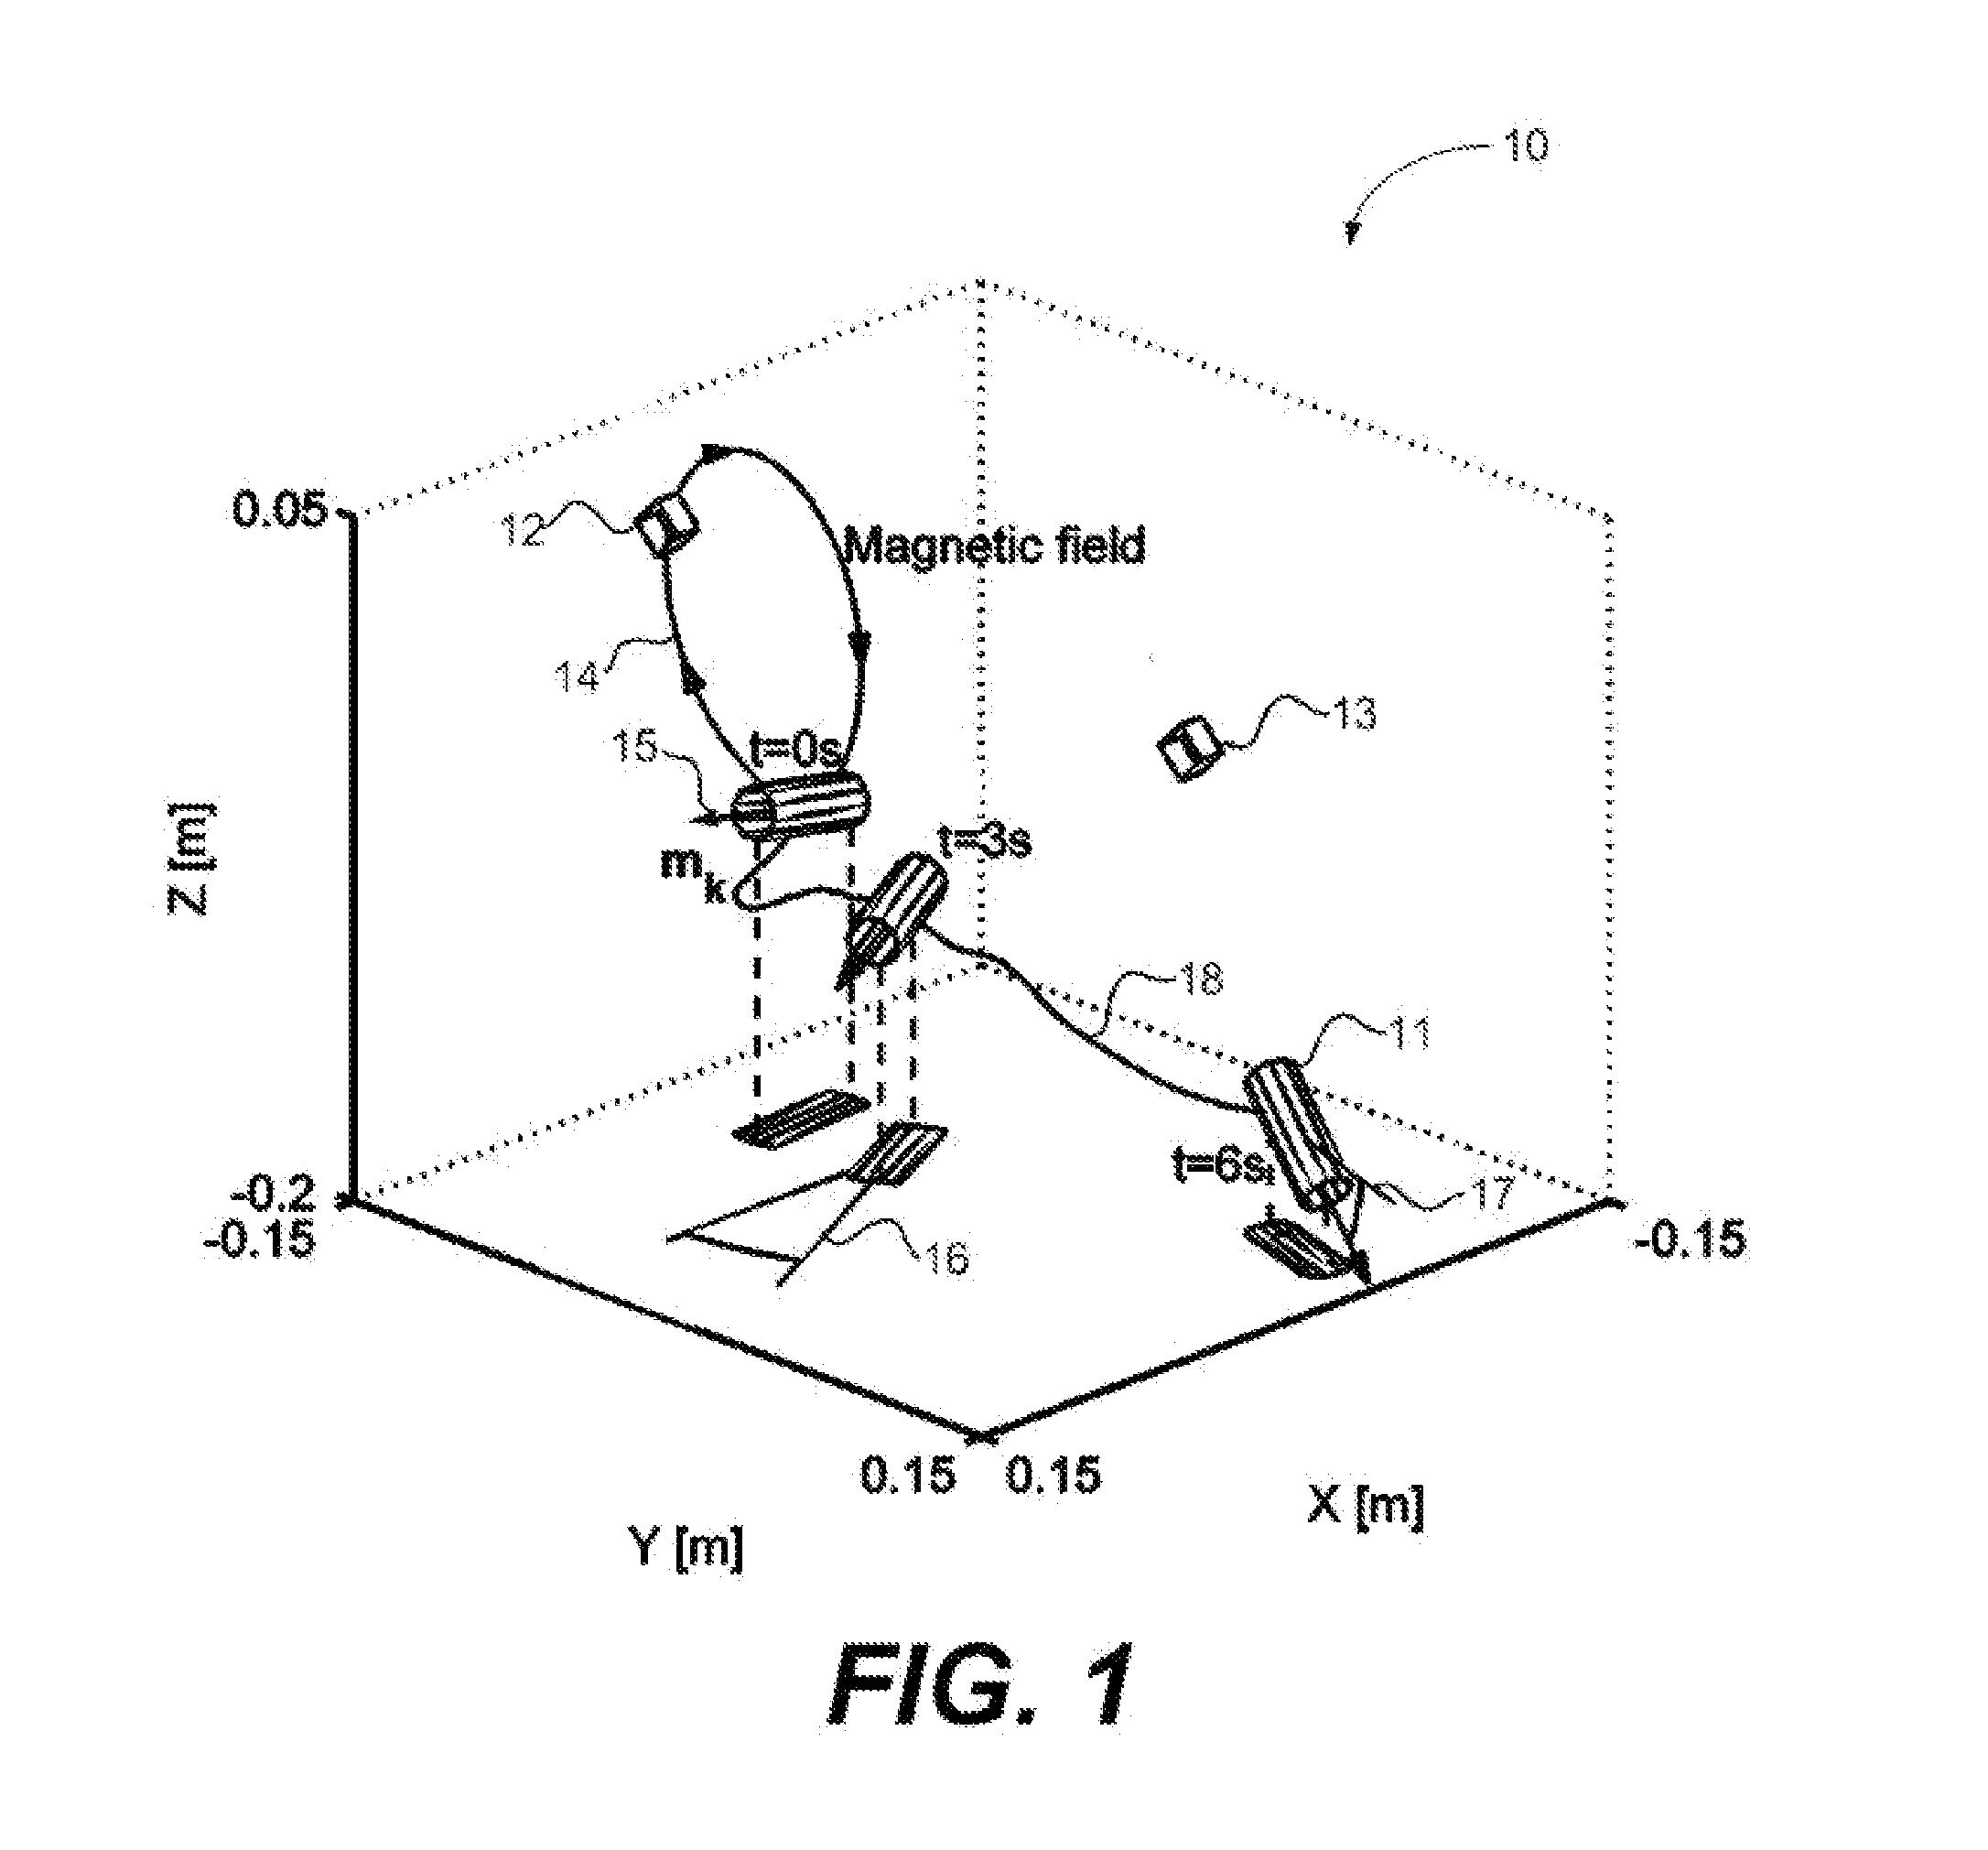 Method and Device for Pose Tracking Using Vector Magnetometers